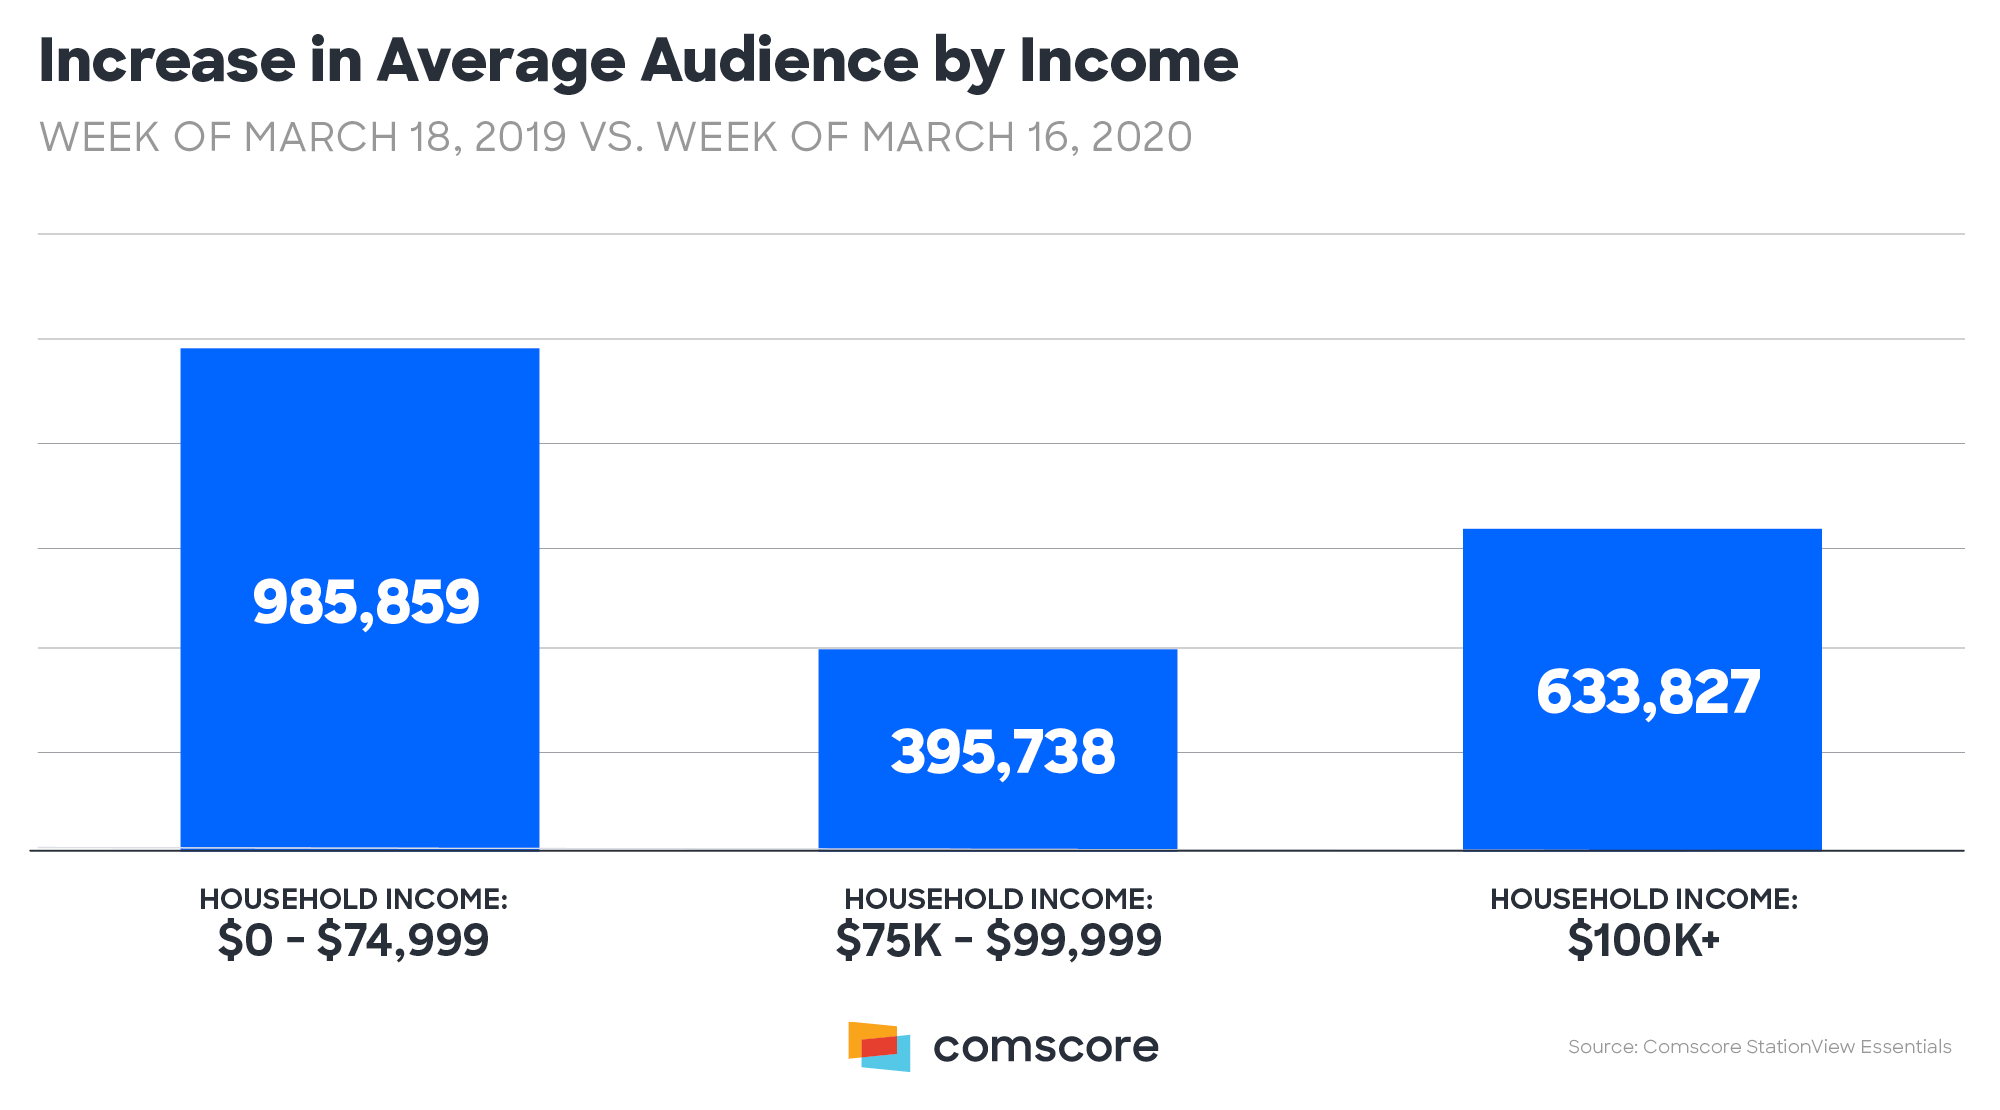 Coronavirus - TV viewing audience increase by Income 2